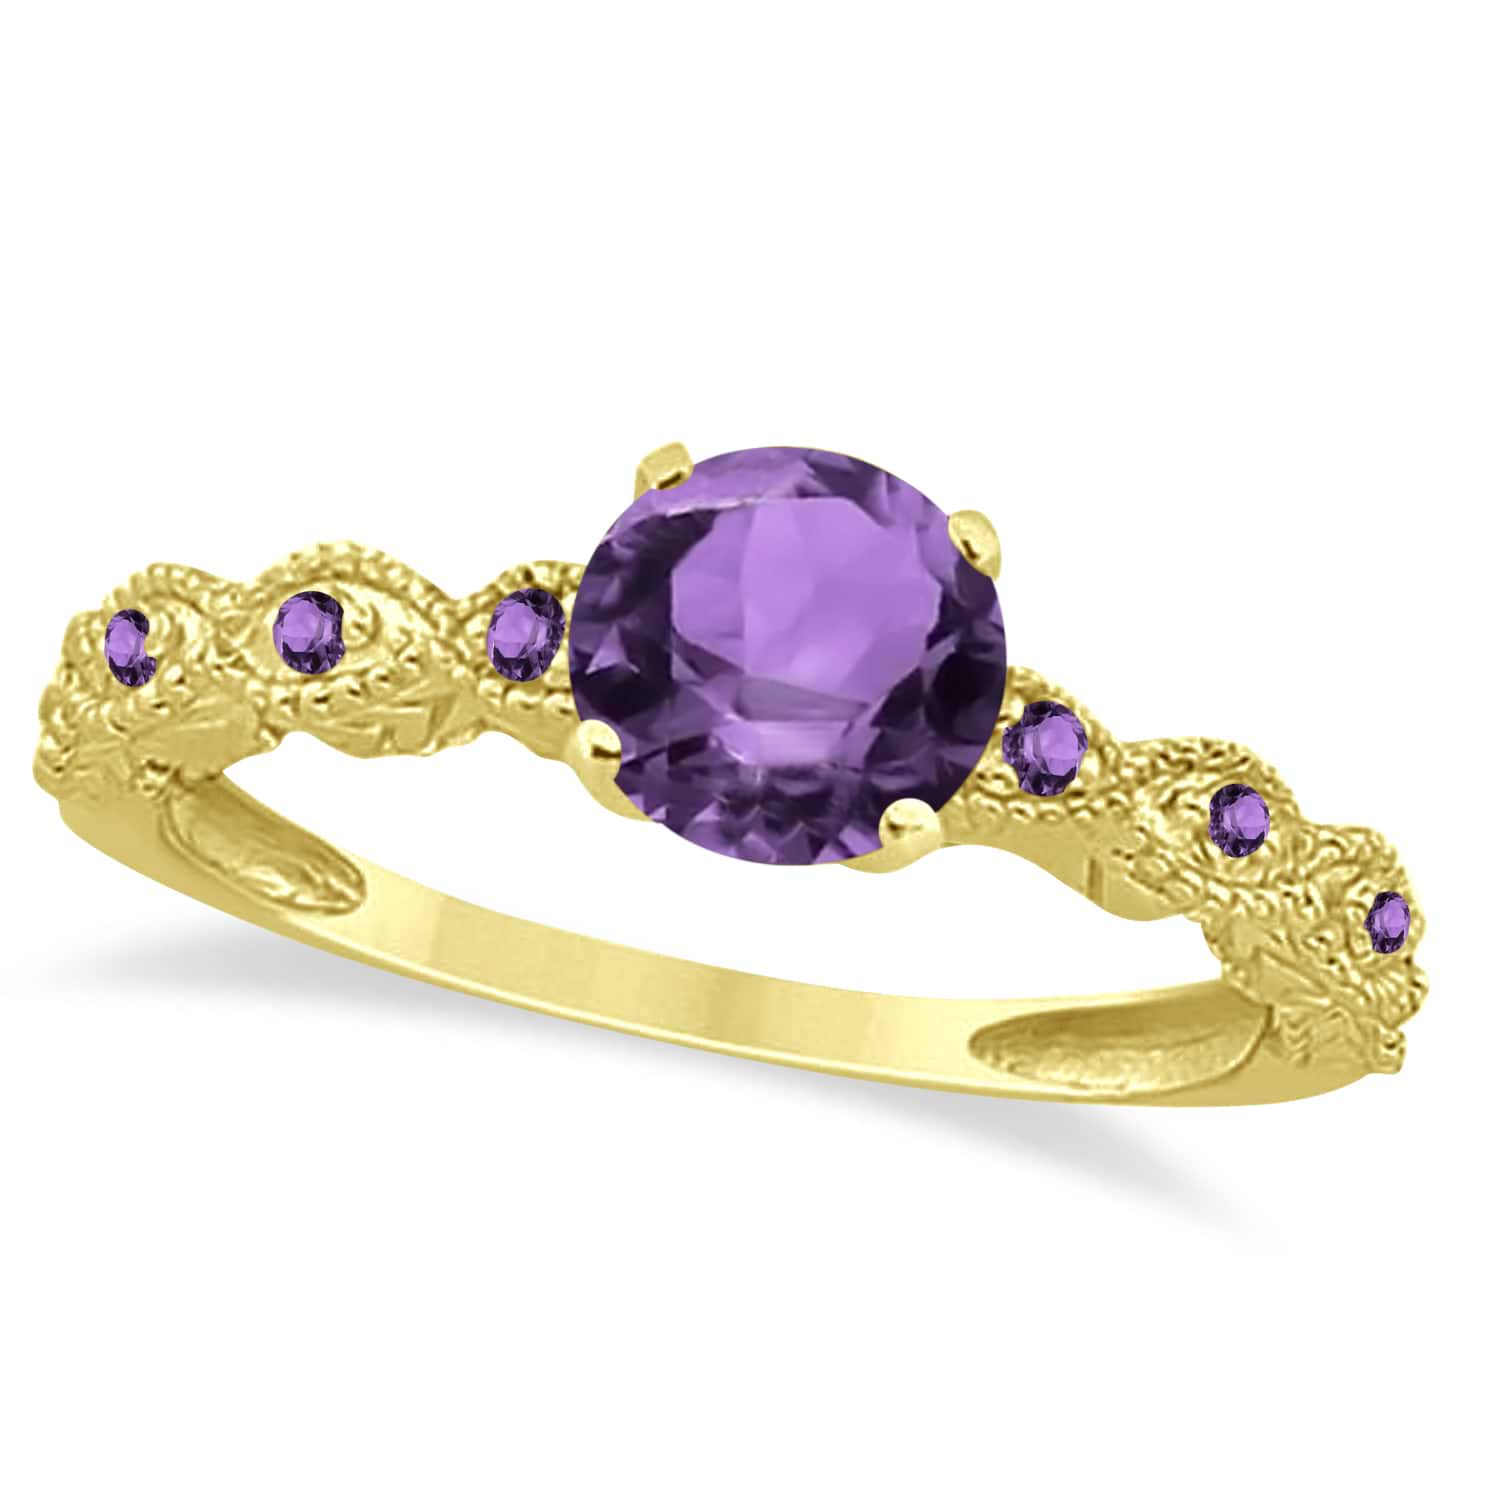 Vintage Style Amethyst Engagement Ring in 14k Yellow Gold (1.18ct)